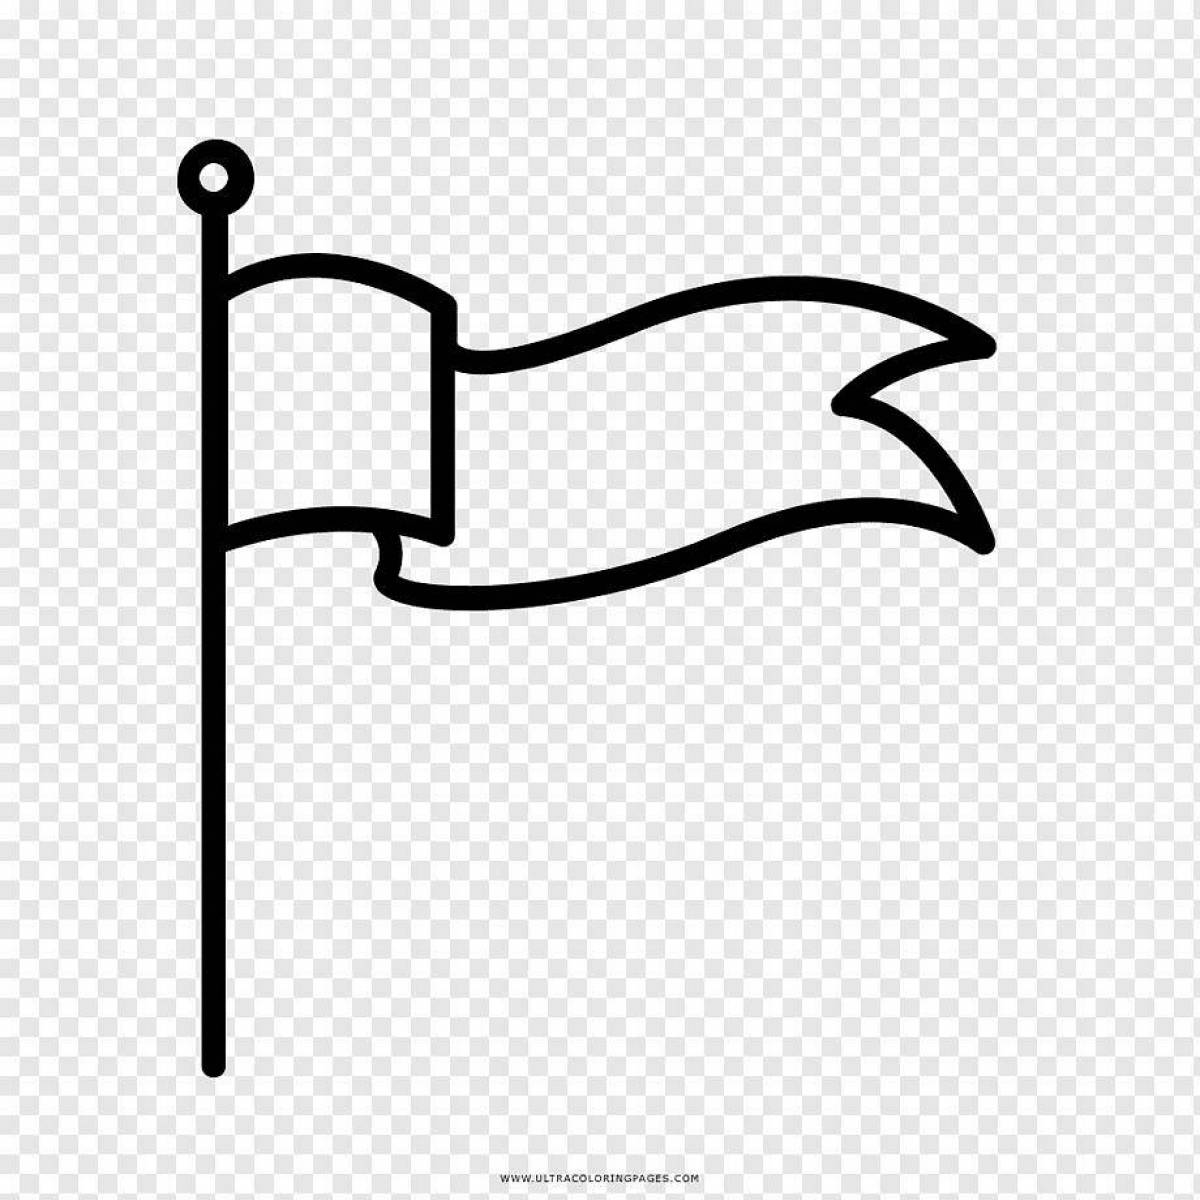 Playful flag coloring page